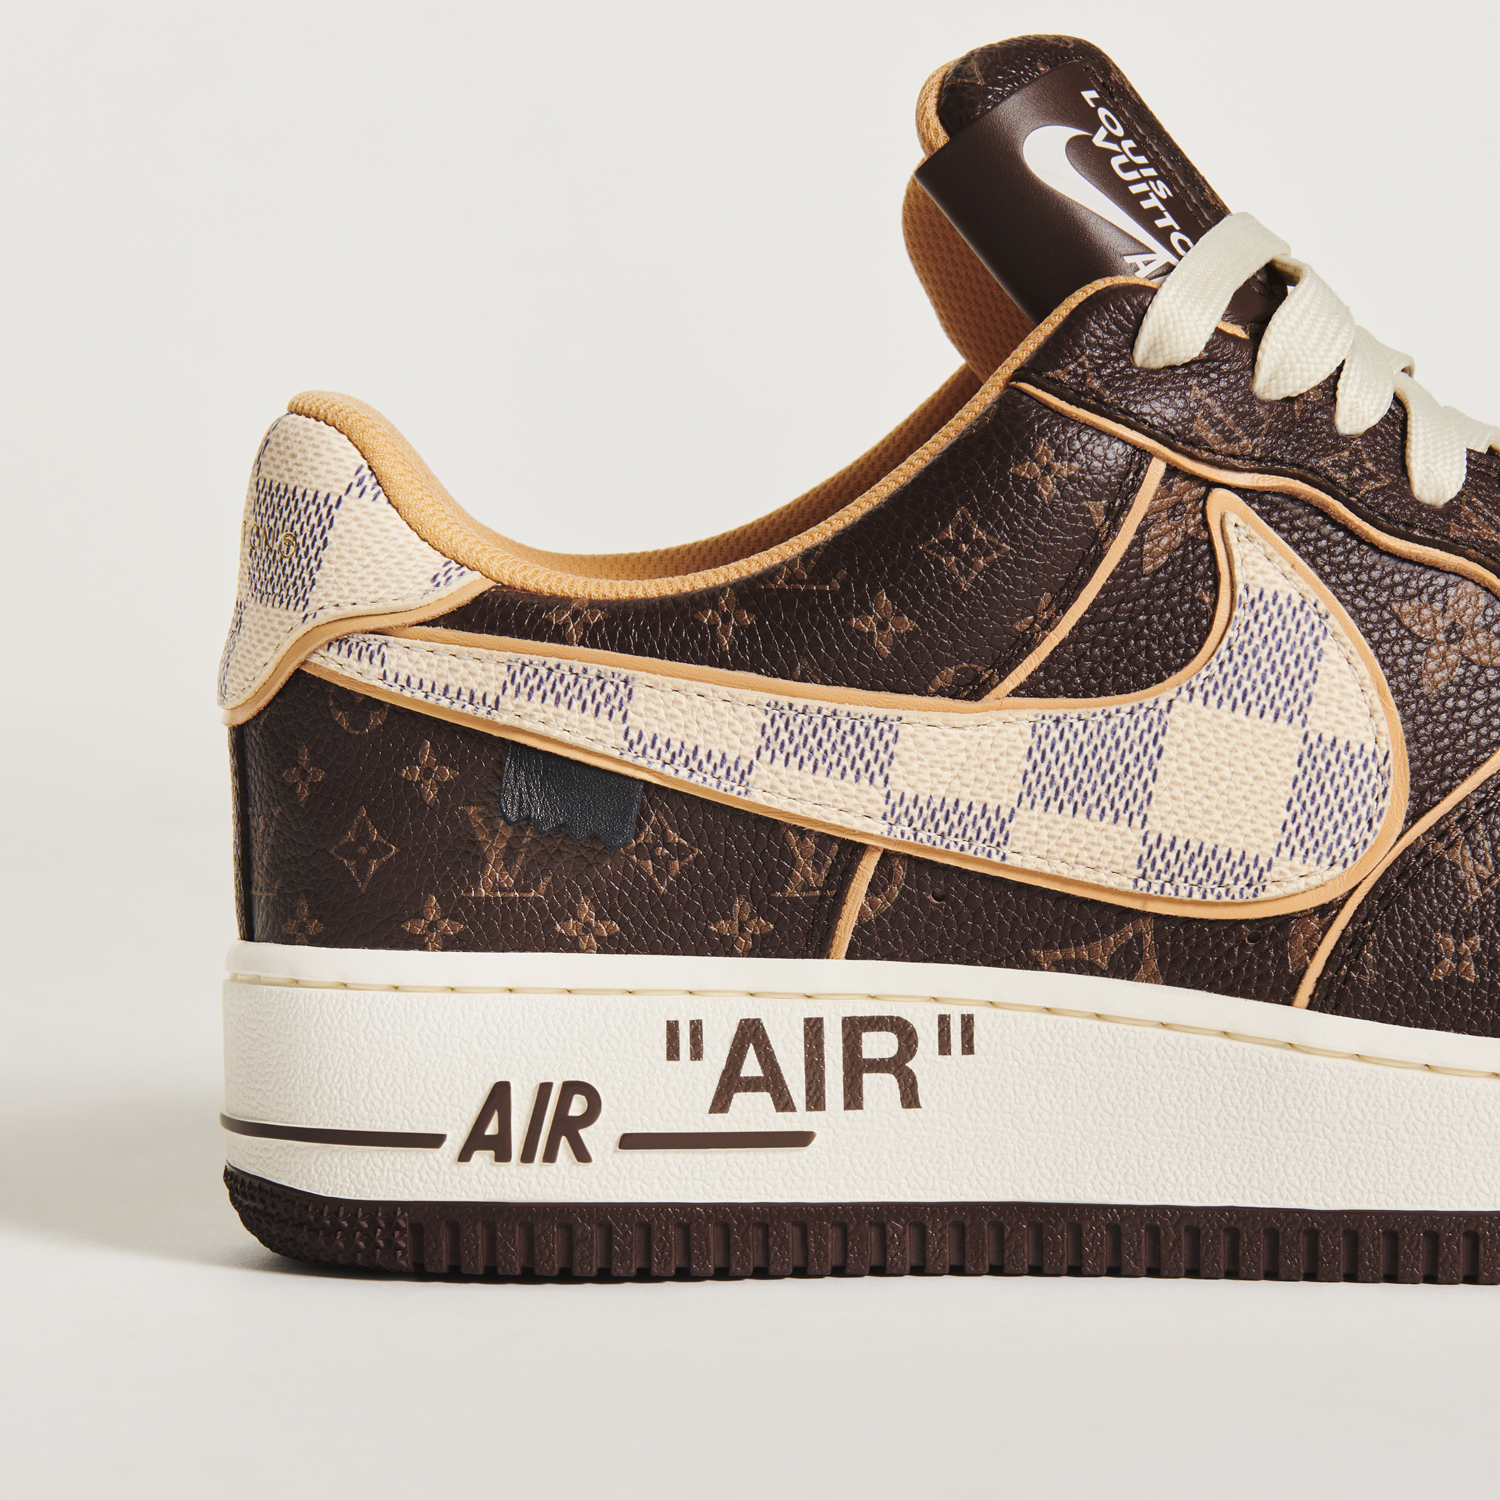 Louis Vuitton x Nike Air Force 1s, Virgil Abloh, and the History